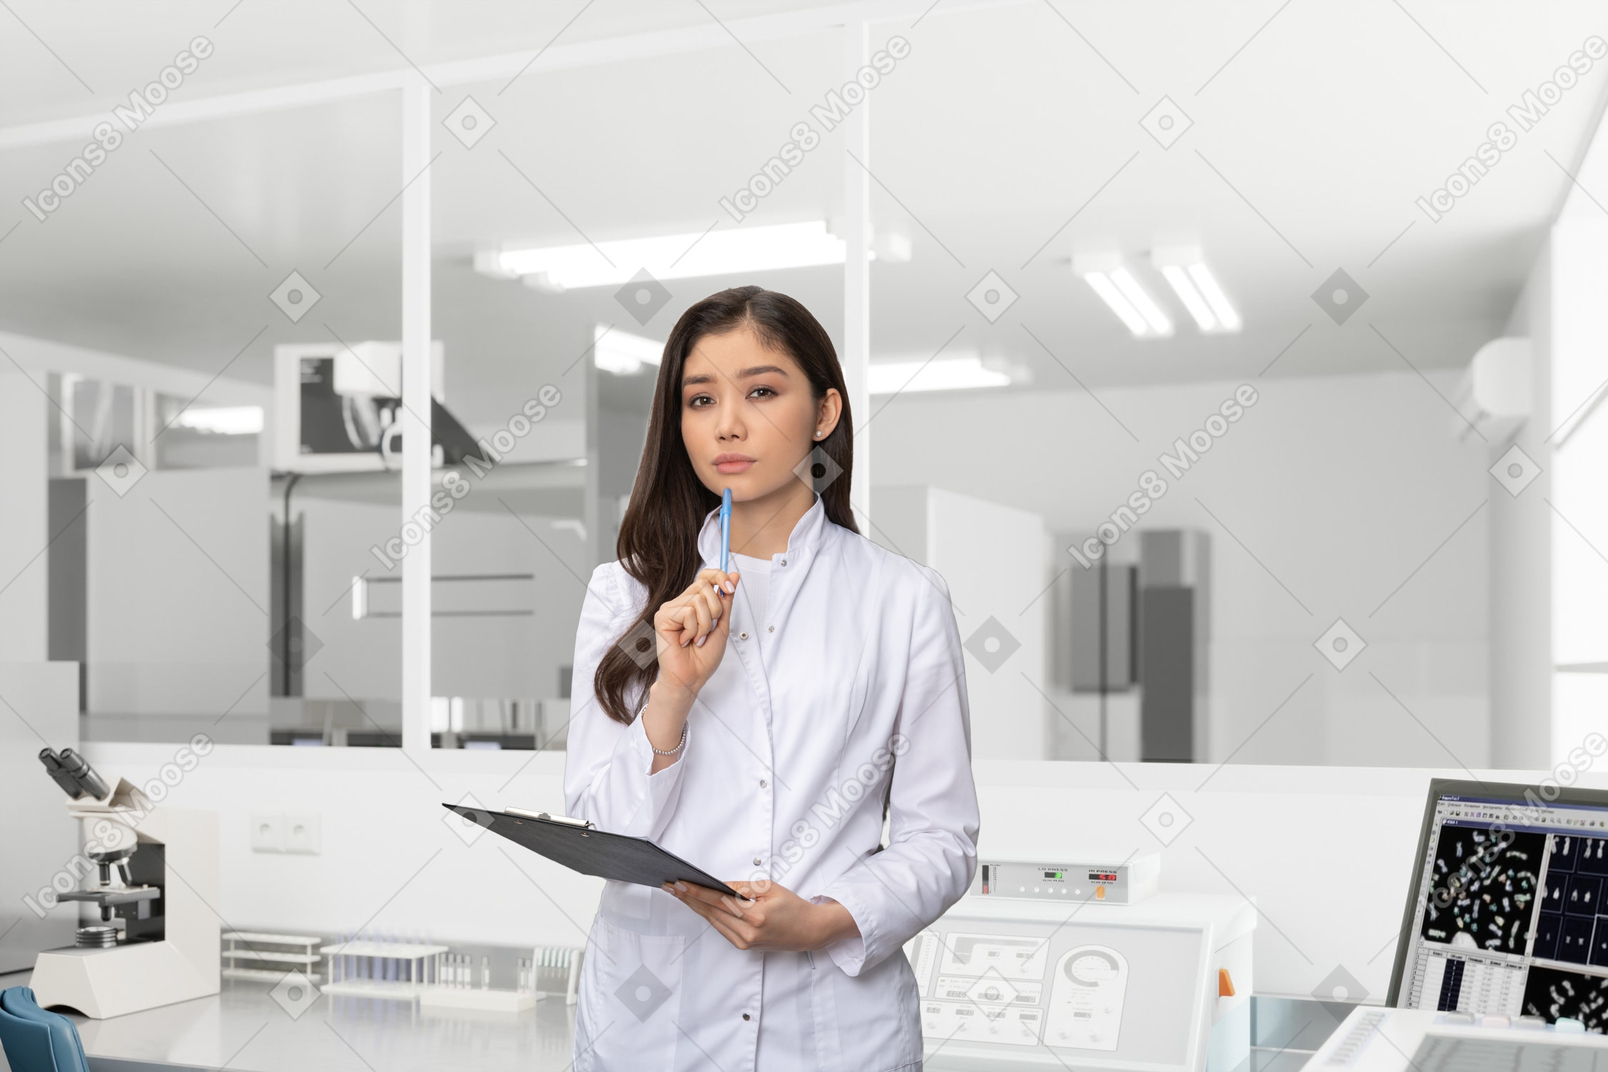 Young woman standing and thinking in the laboratory